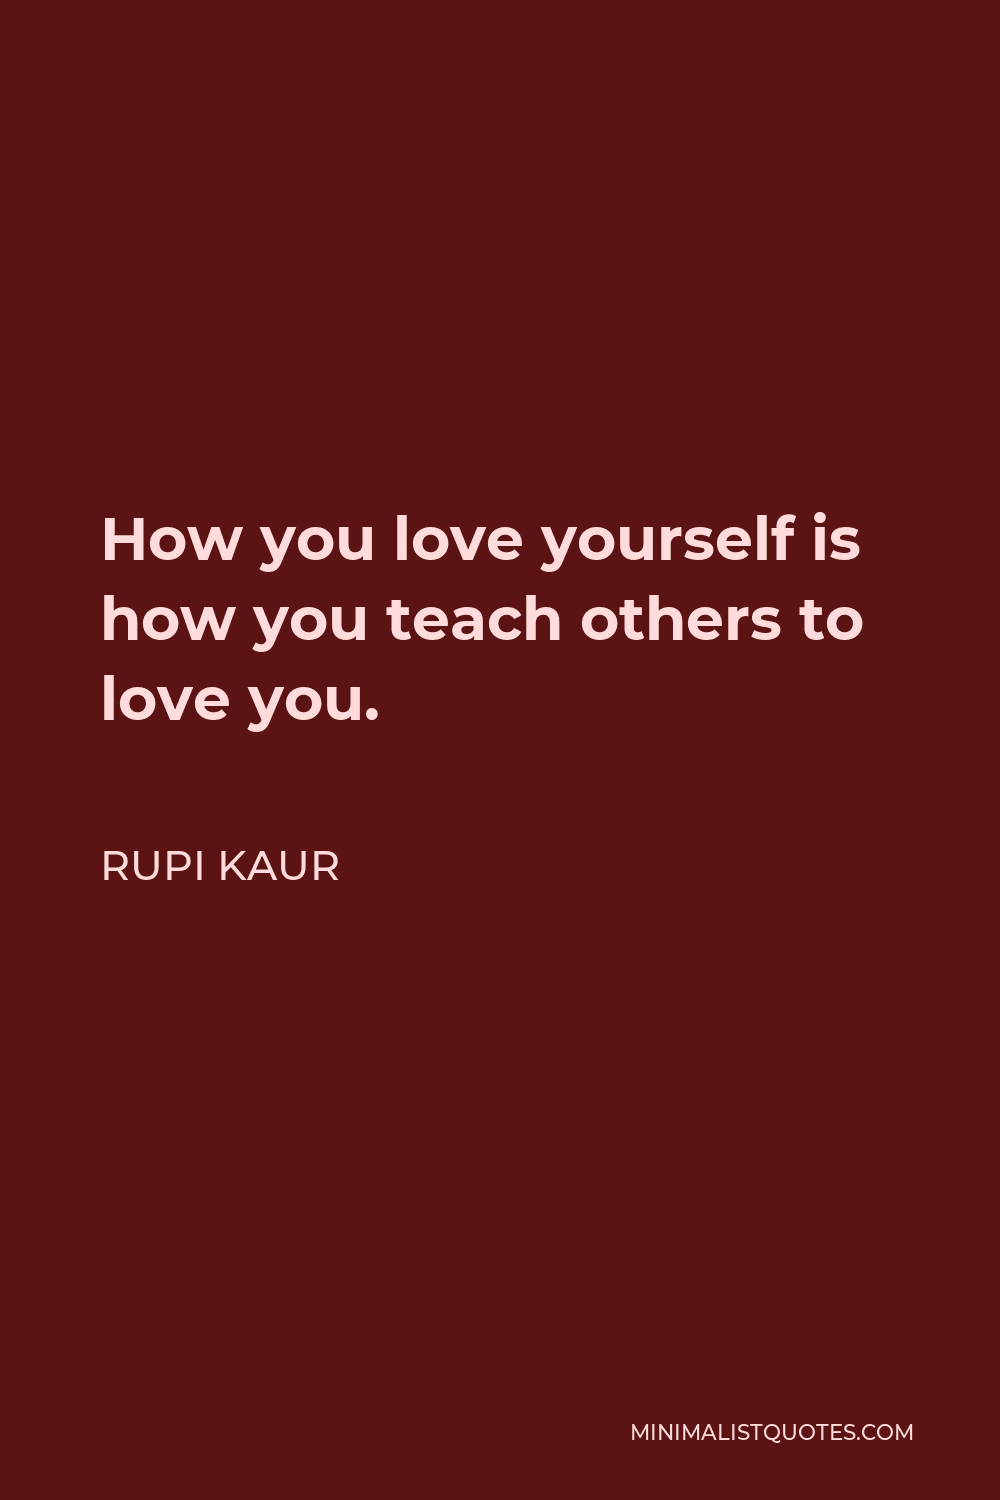 Rupi Kaur Quote: How you love yourself is how you teach others to love you.